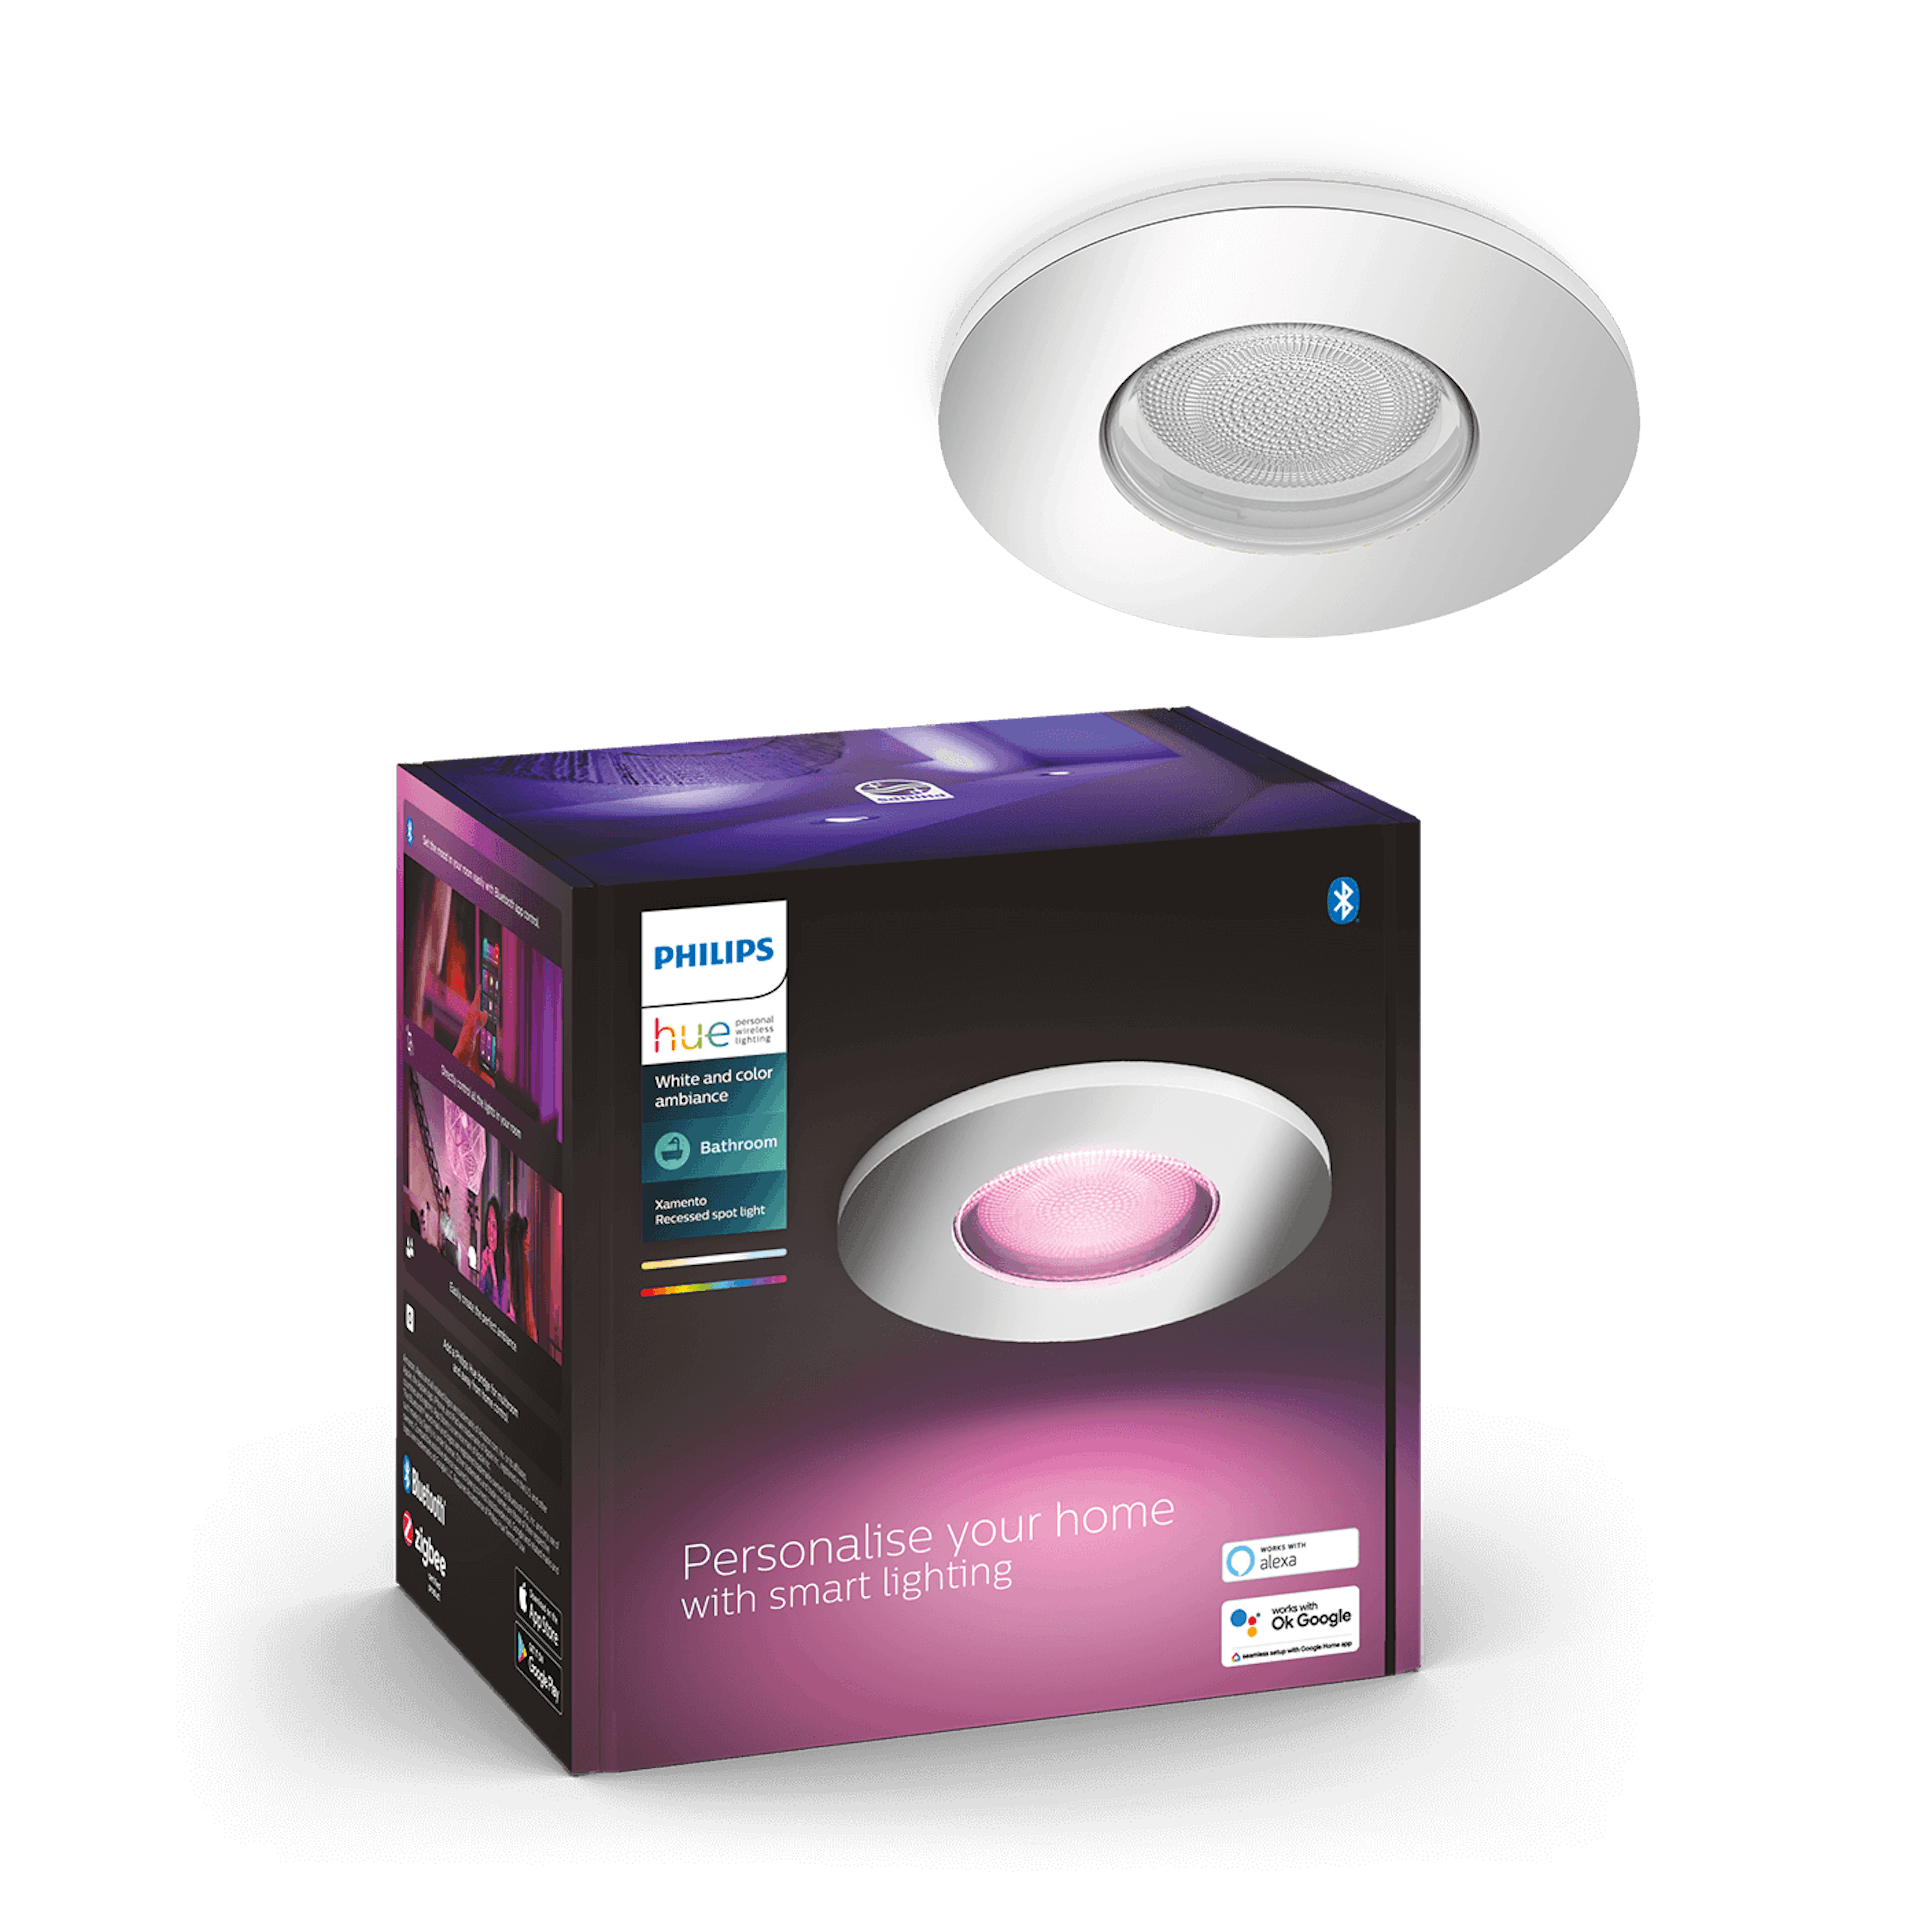 Philips Hue Xamento - Details - Packaging image